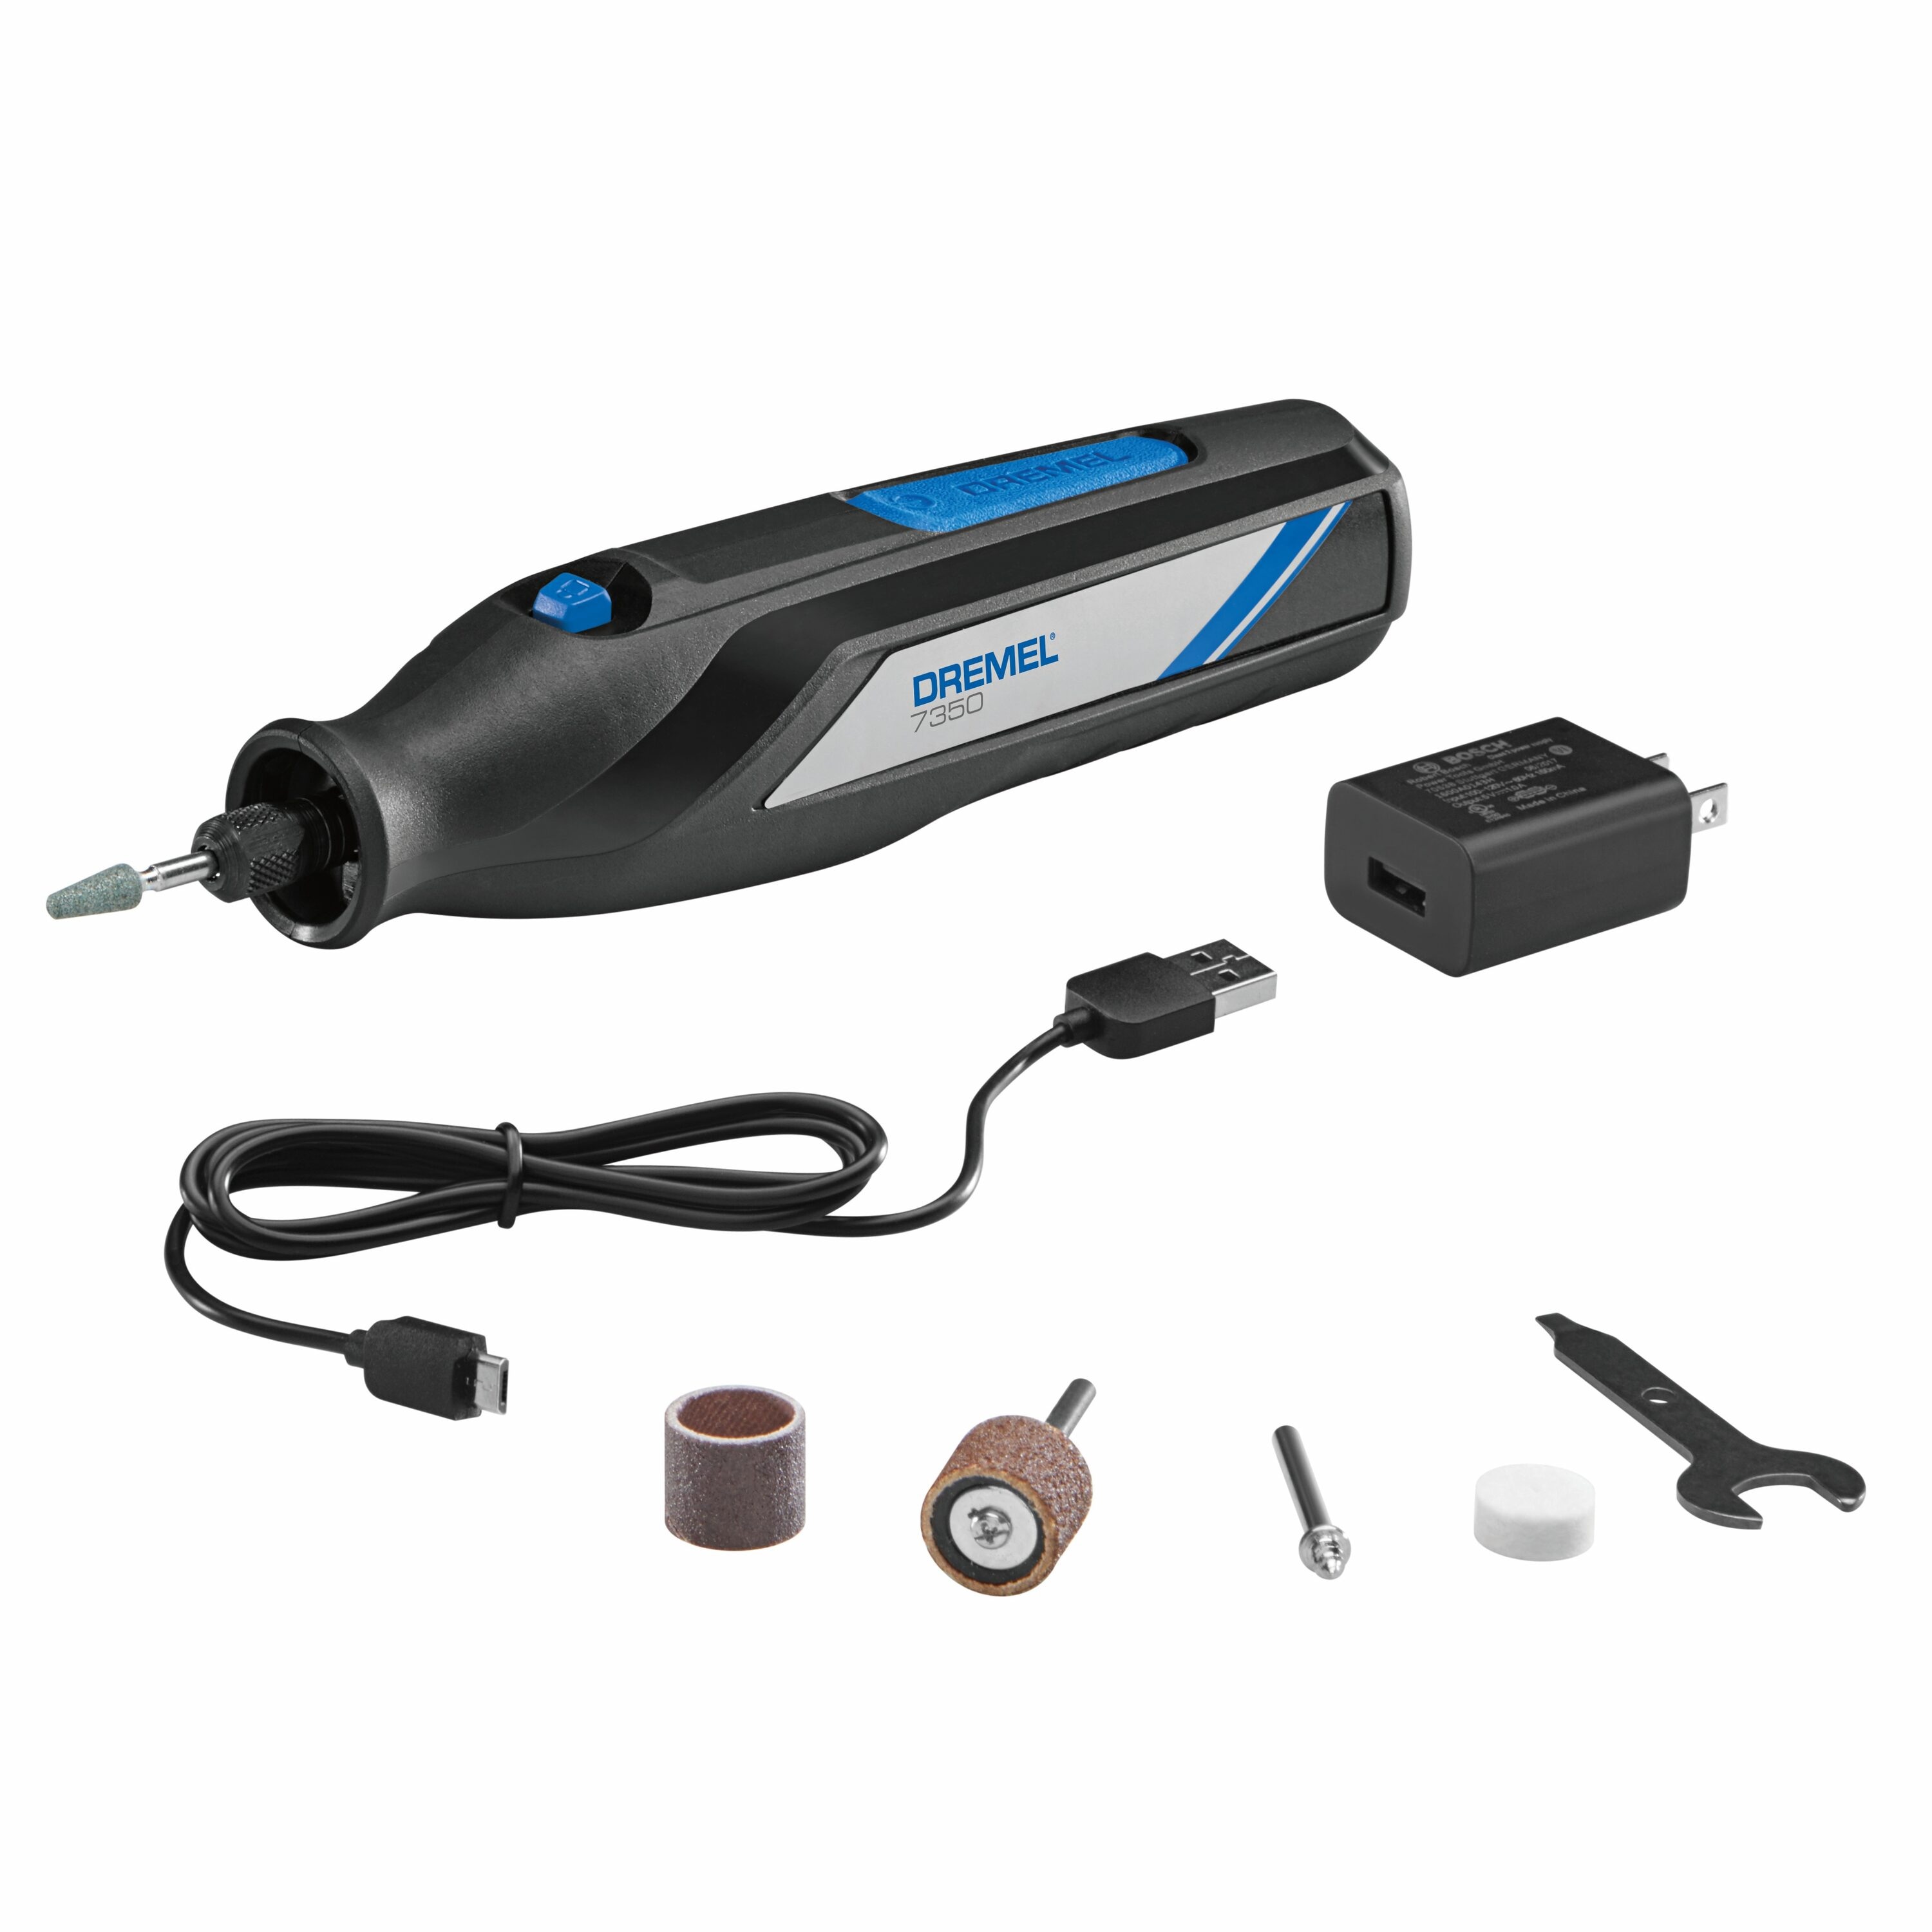 5V Mini Electric Drill For DIY Carving Needs - Inspire Uplift